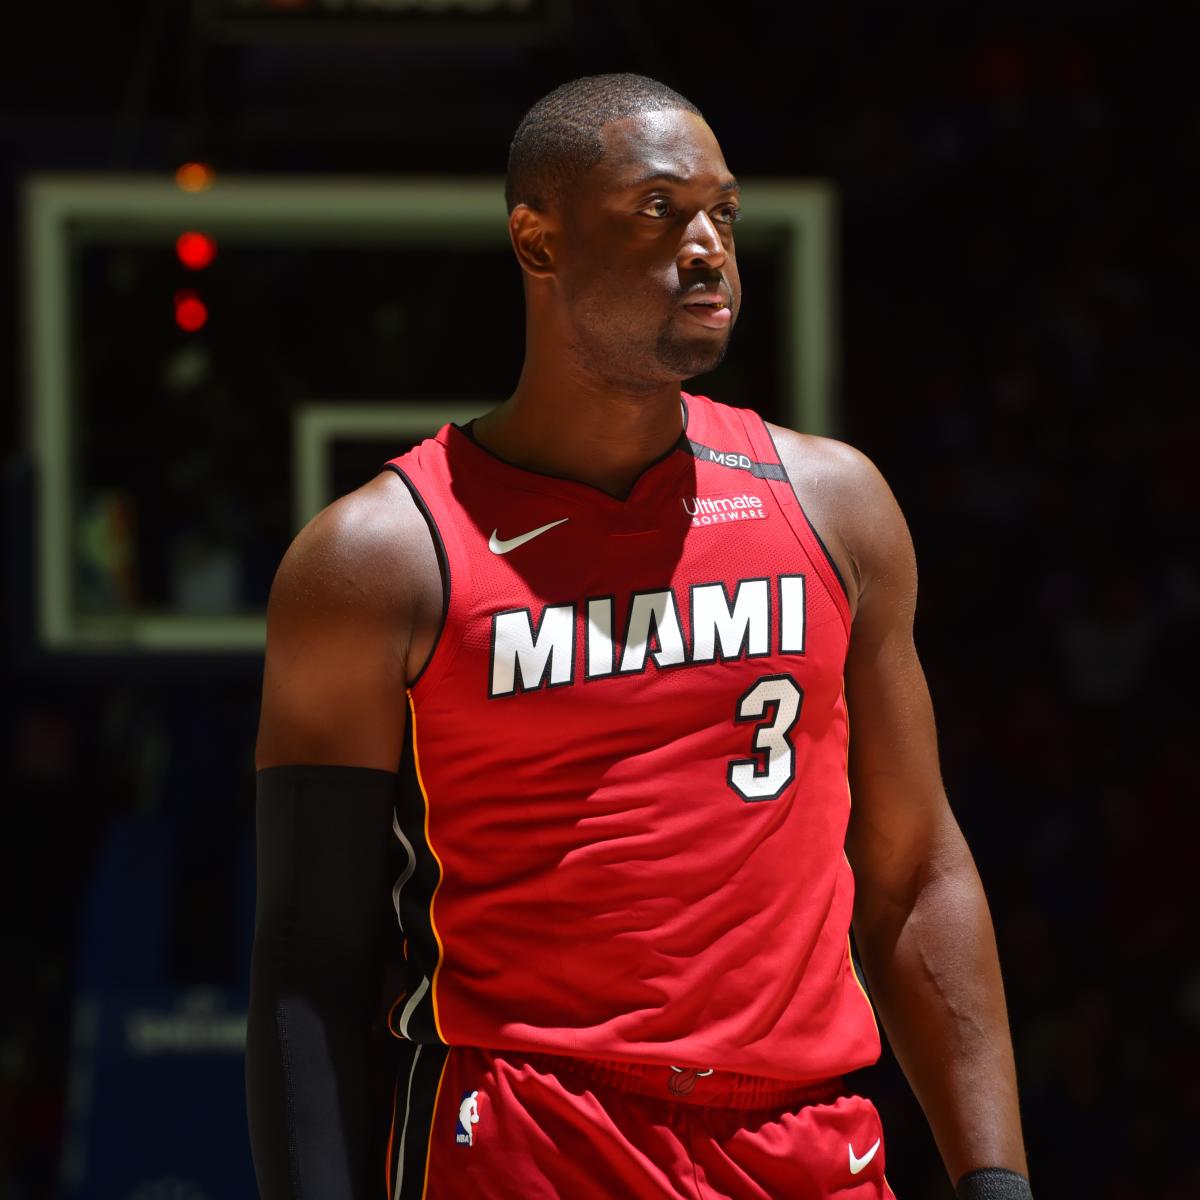 Did Dwyane Wade bring balance to the NBA with all of his jersey